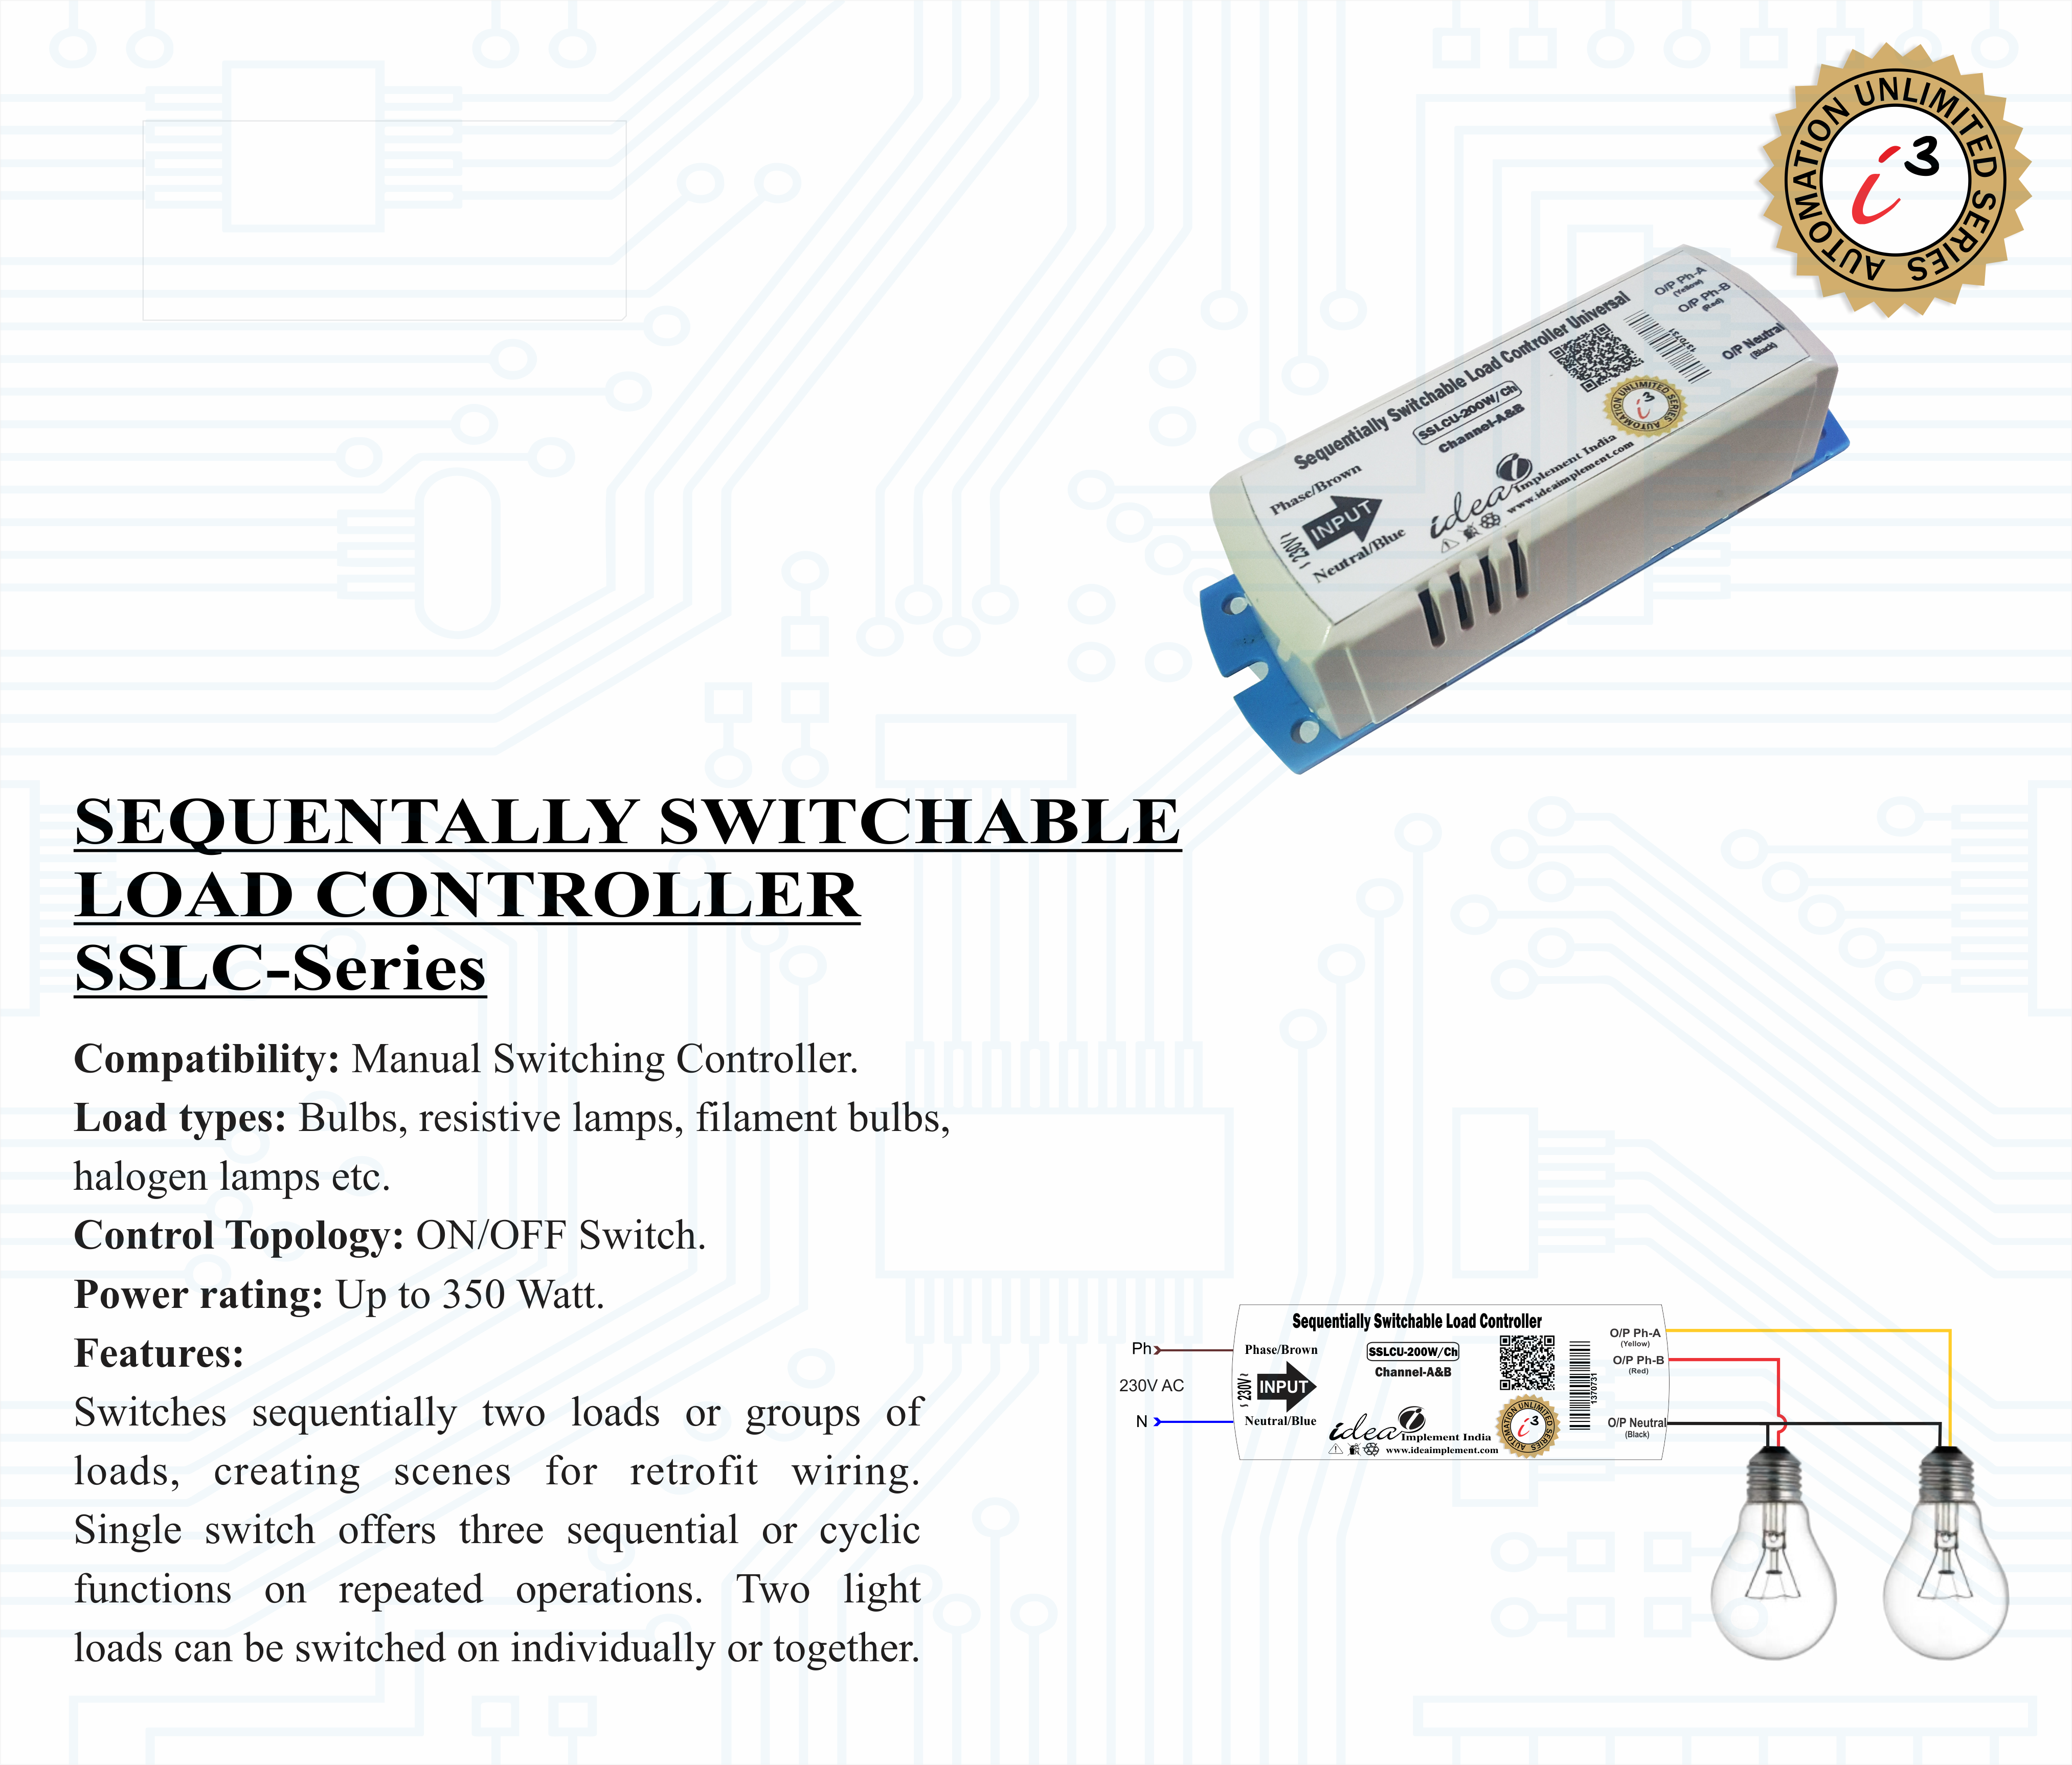 SEQUENTIALLY SWITCHABLE LOAD CONTROLLER SSLC-SERIES